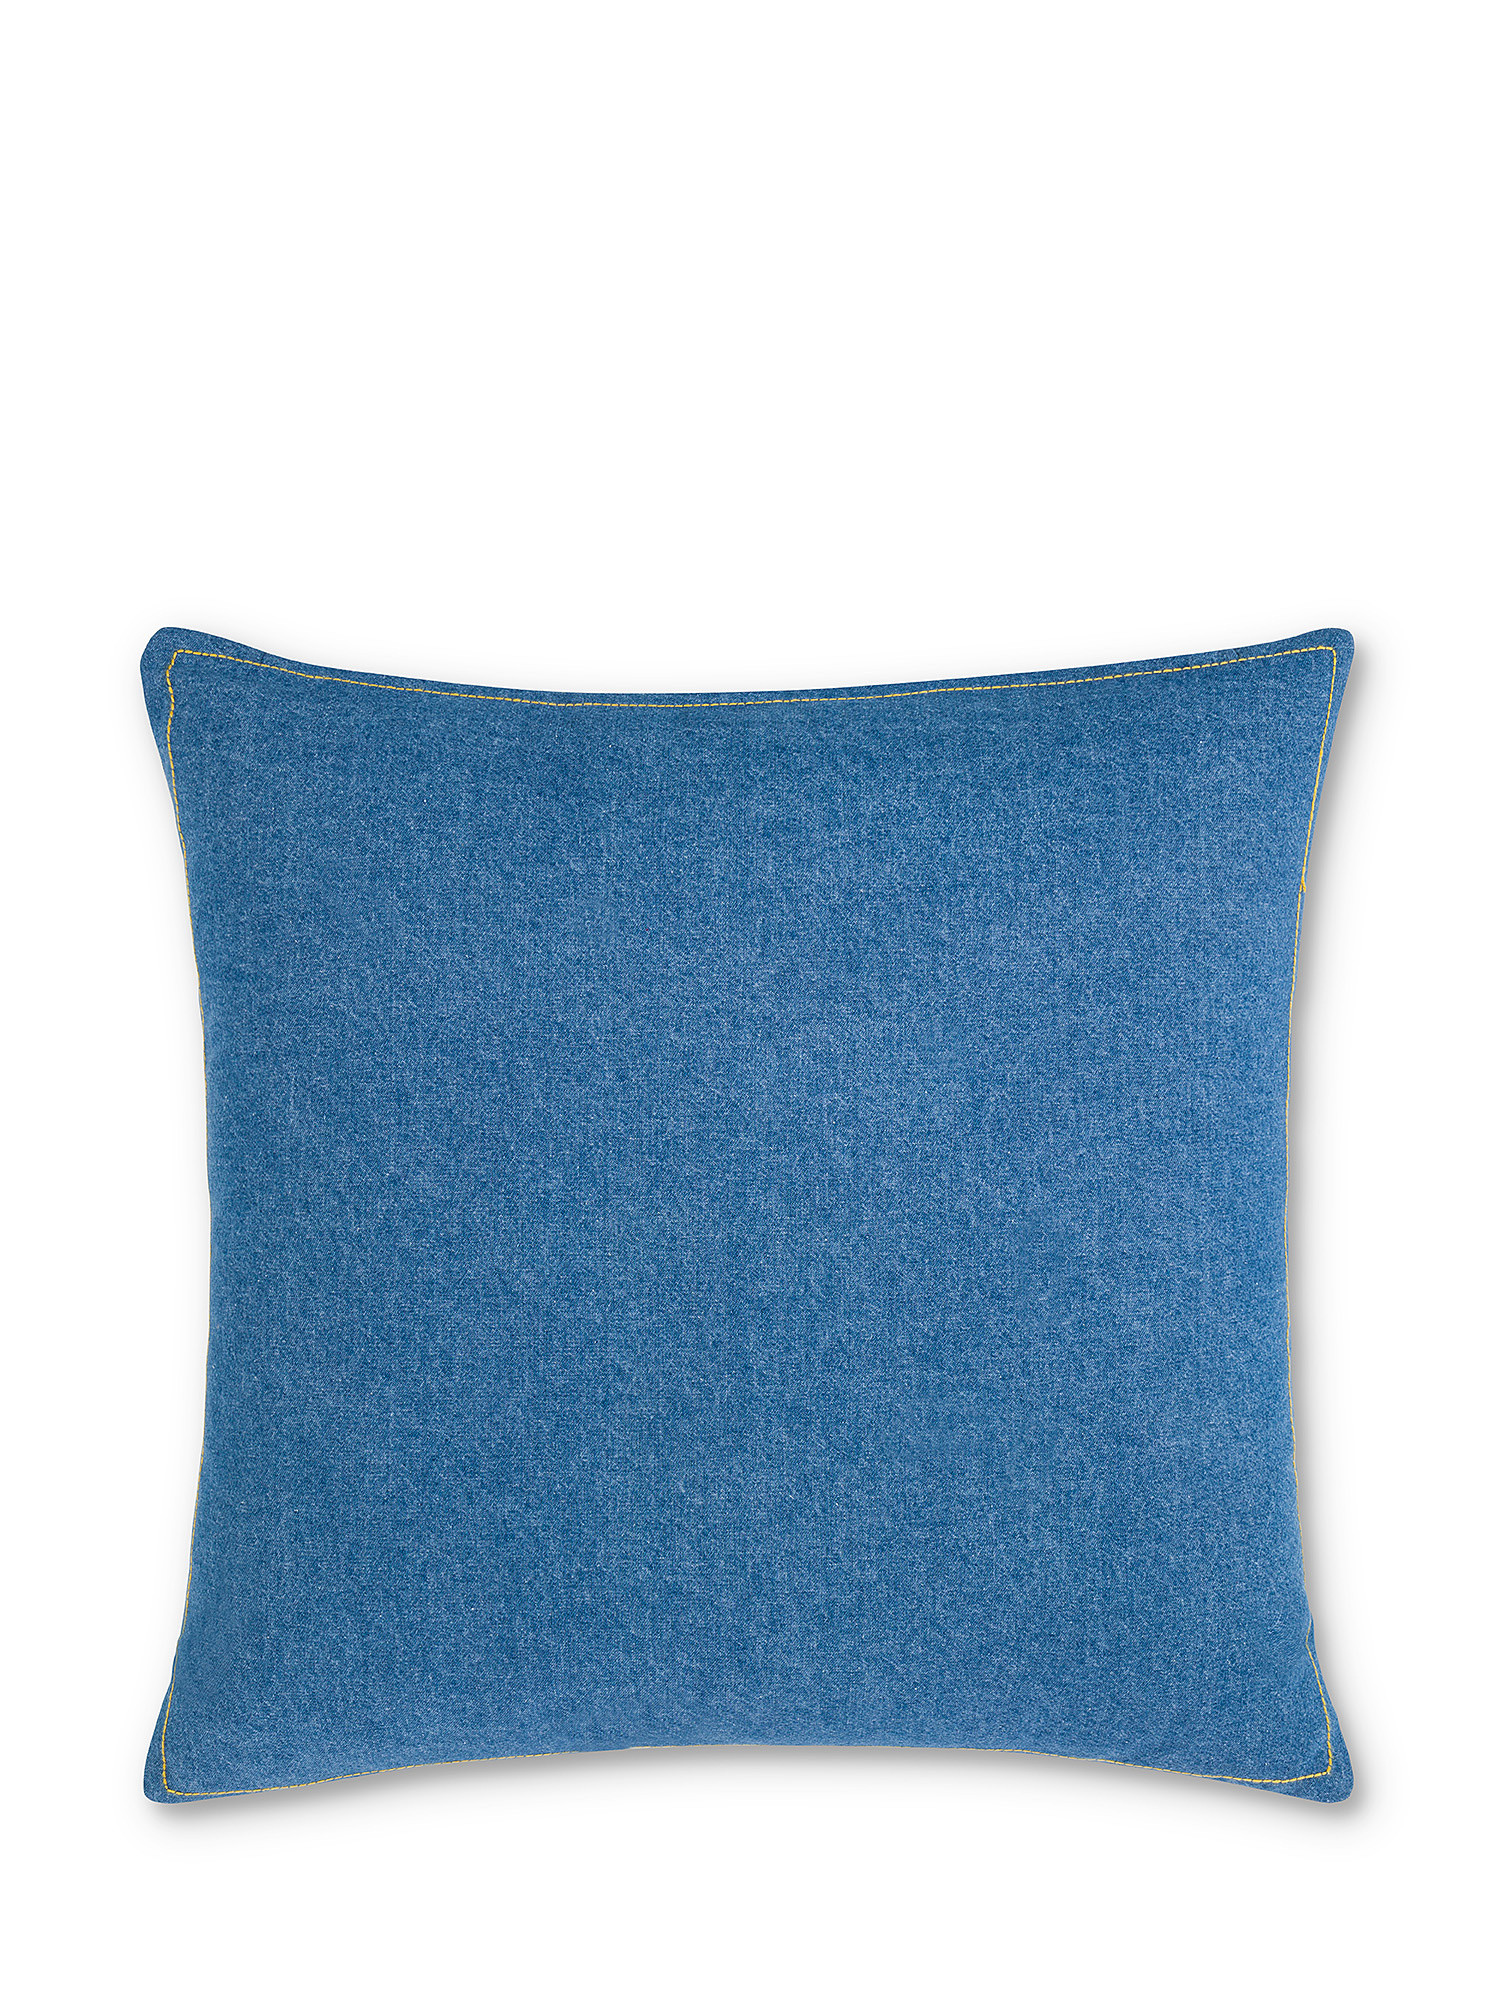 Cotton denim cushion with pocket embroidery 45x45cm, Light Blue, large image number 1